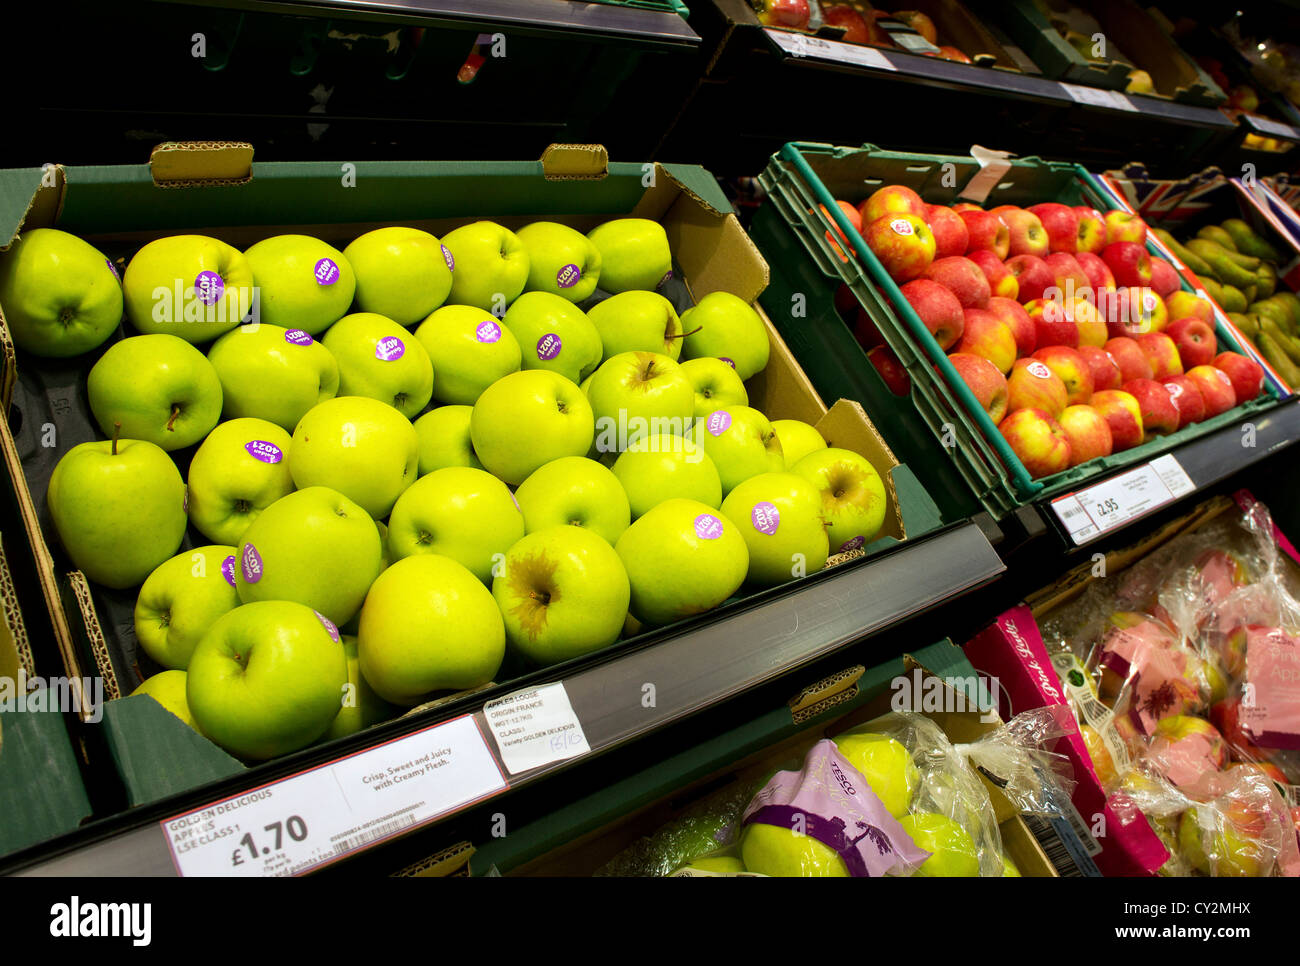 Golden Delicious apples in a uk supermarket Stock Photo